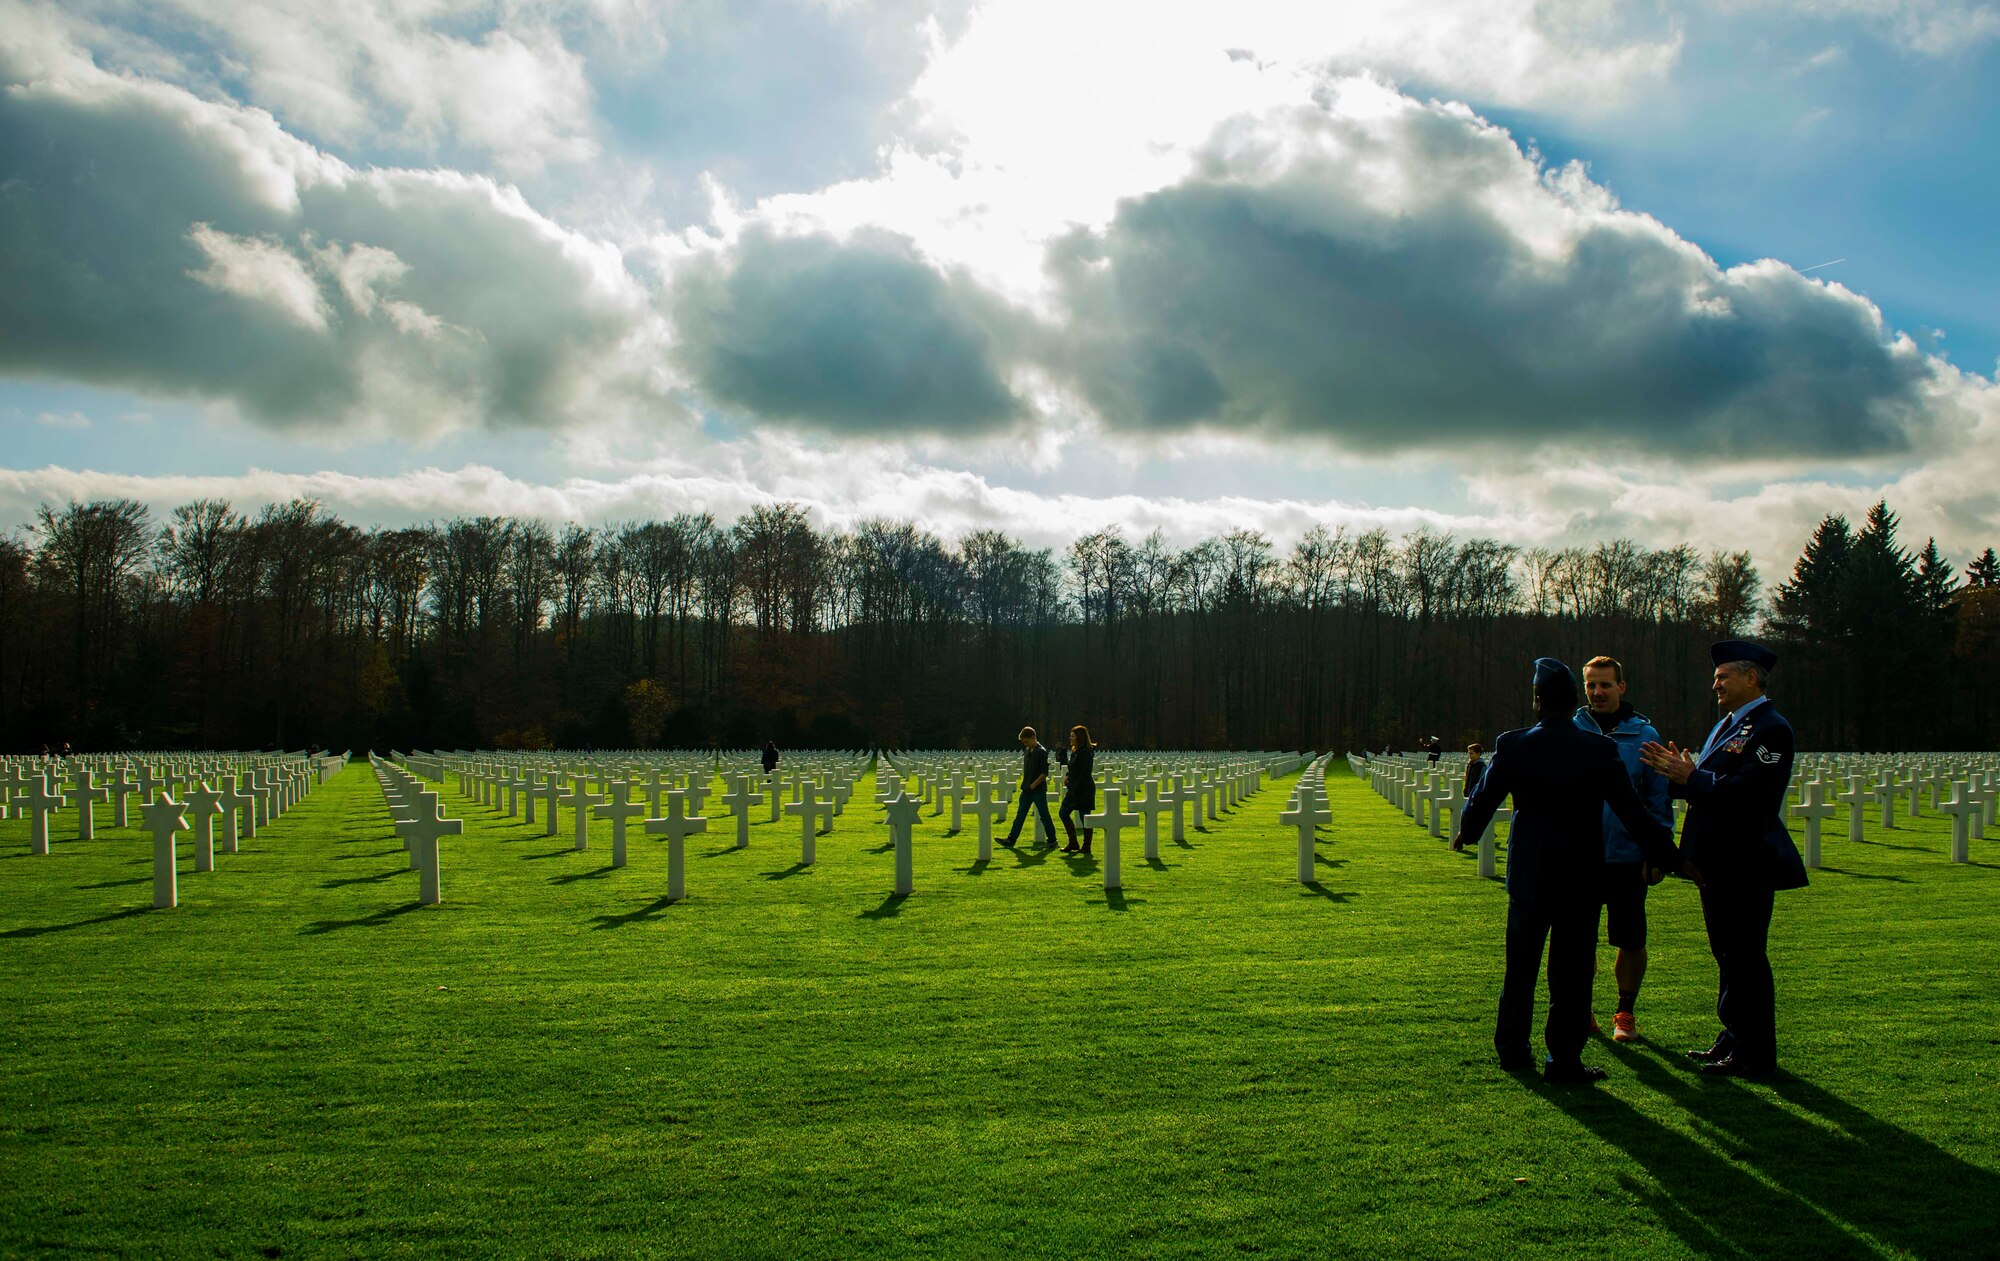 U.S. Air Force service members visit the Luxembourg American Cemetery and Memorial after a wreath-laying ceremony in Hamm, Luxembourg City, Luxembourg, Nov. 11, 2015. The cemetery was established on Dec. 29, 1944 by the 609th Quartermaster Company of the U.S. Third Army in Luxembourg, which served as headquarters for U.S. Army Gen. George Patton, whose headstone was raised there. (U.S. Air Force photo by Airman 1st Class Timothy Kim/Released)